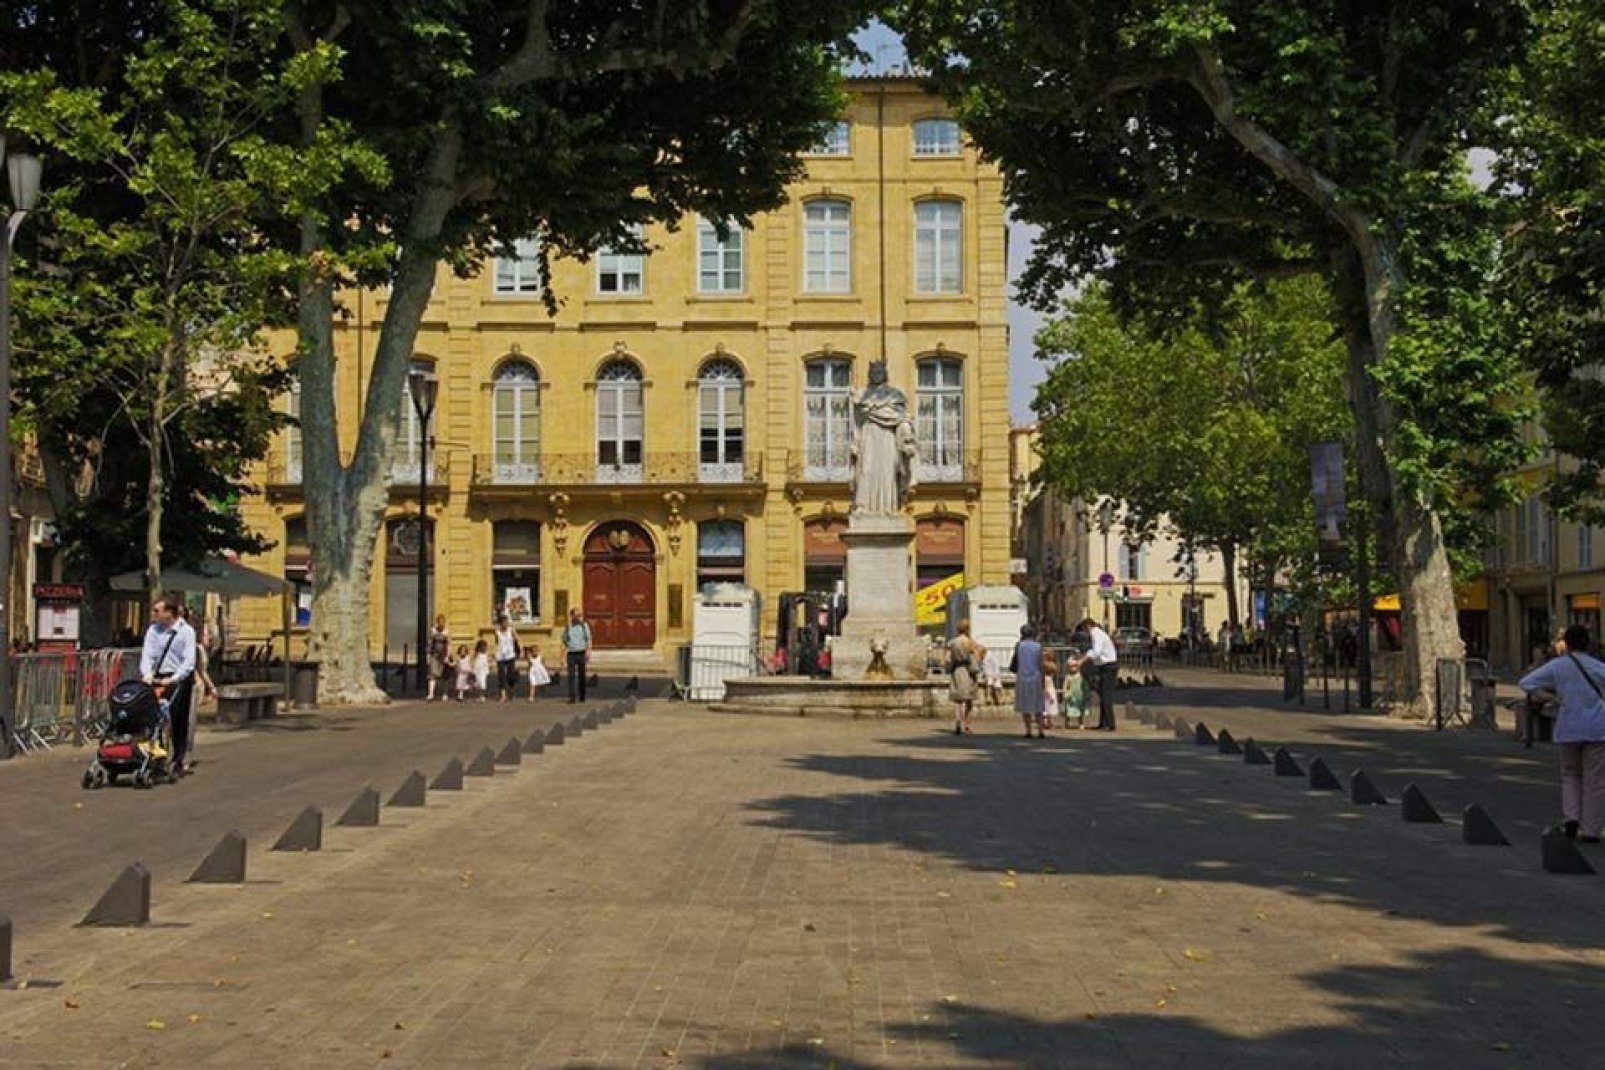 This is the best known thoroughfare in Aix-en-Provence, running from east to west for some 400m. The statue of King René stands just in front of Forbin Square, at the far eastern end of the Cours Mirabeau.